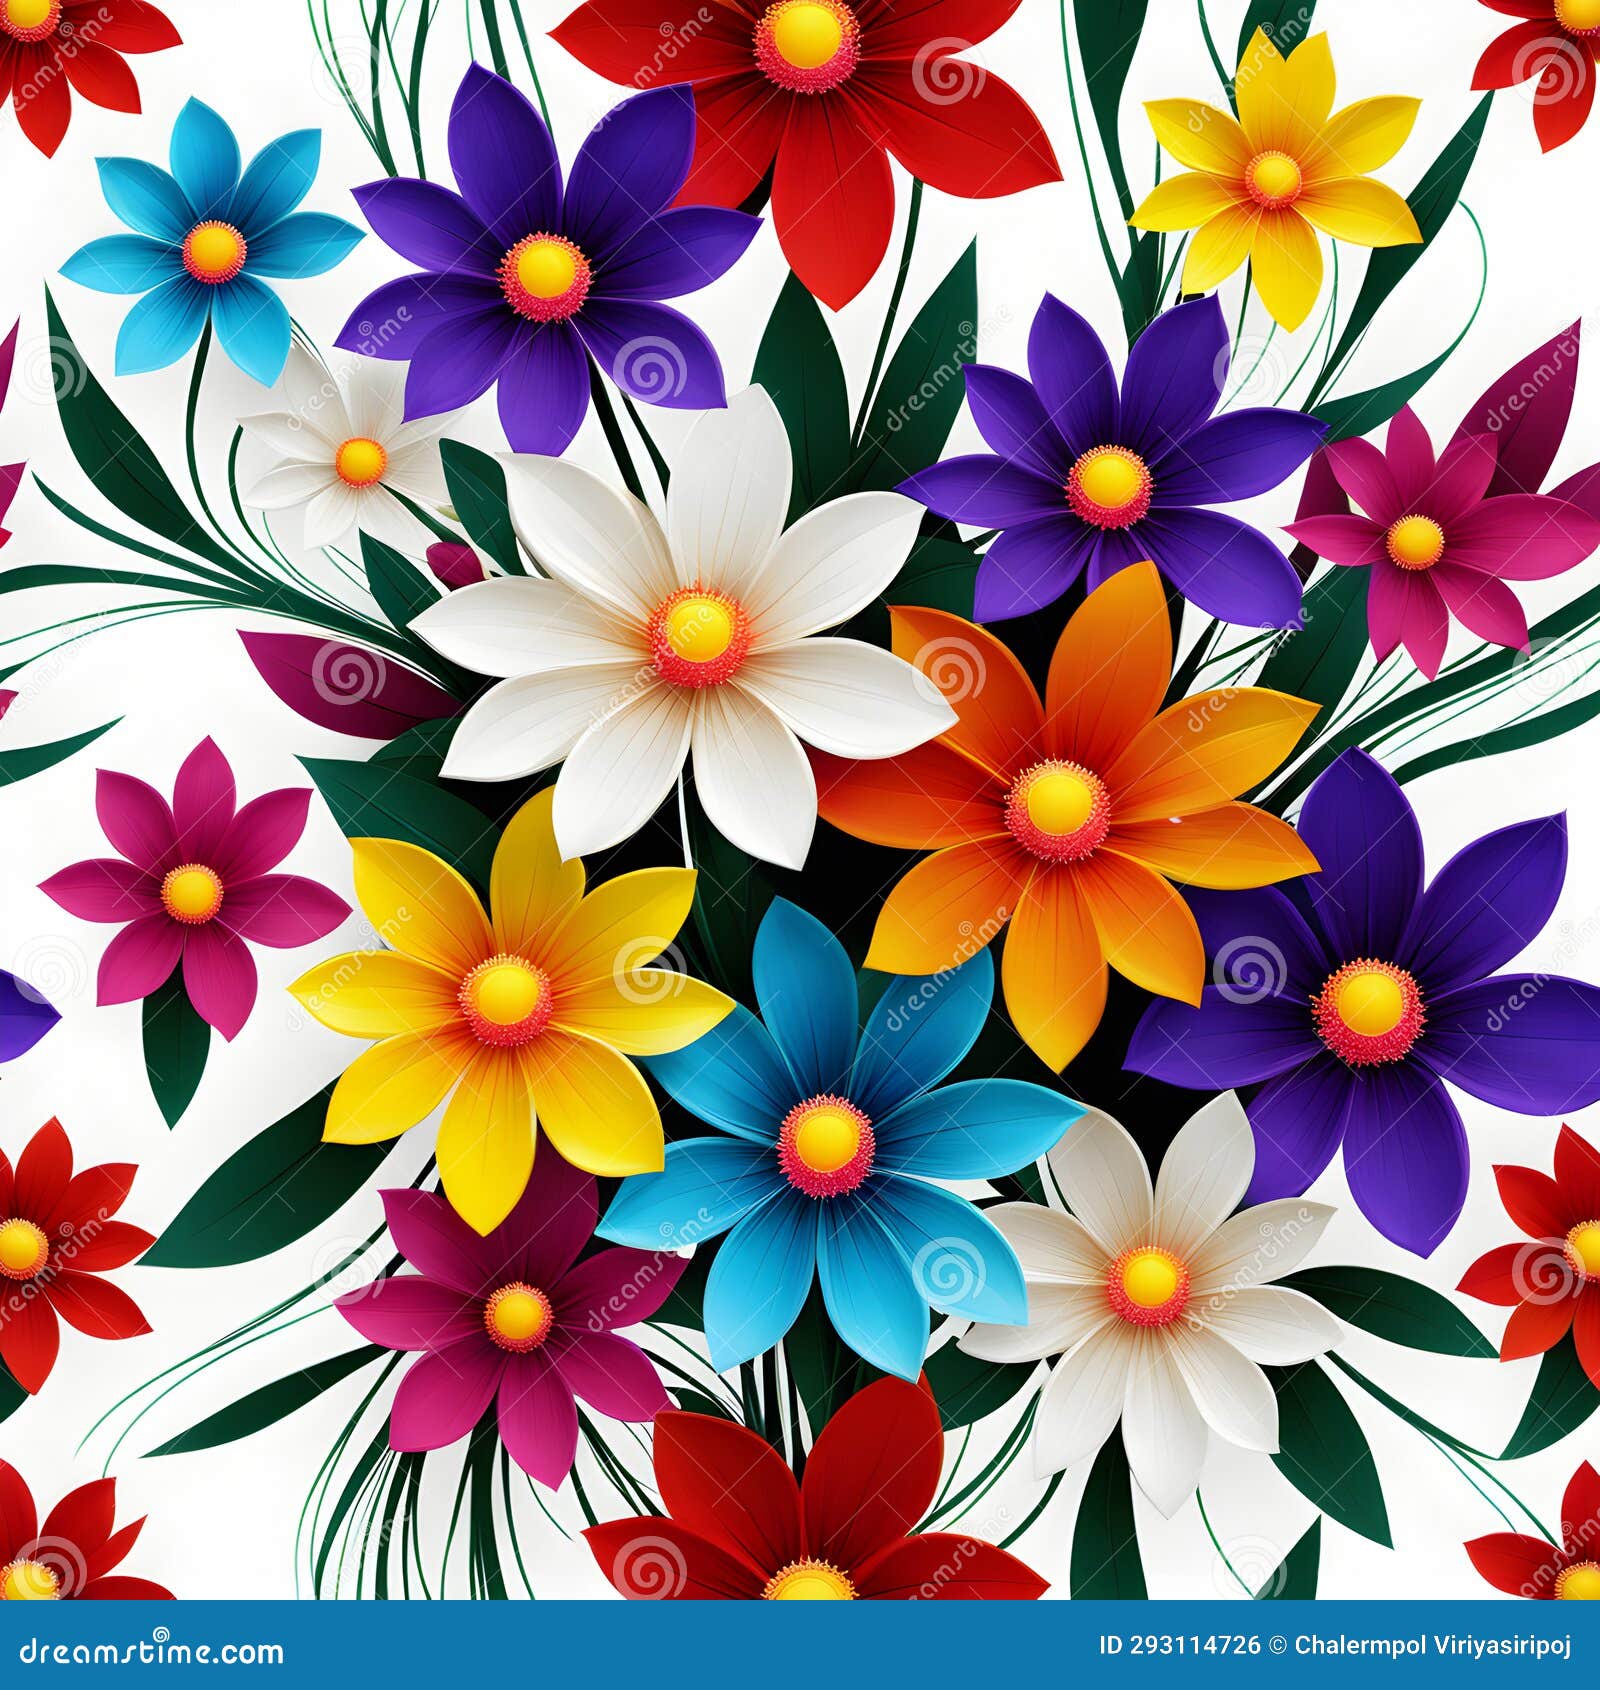 A Bouquet Of Colorful Flowers On A White Background Floral Flowers